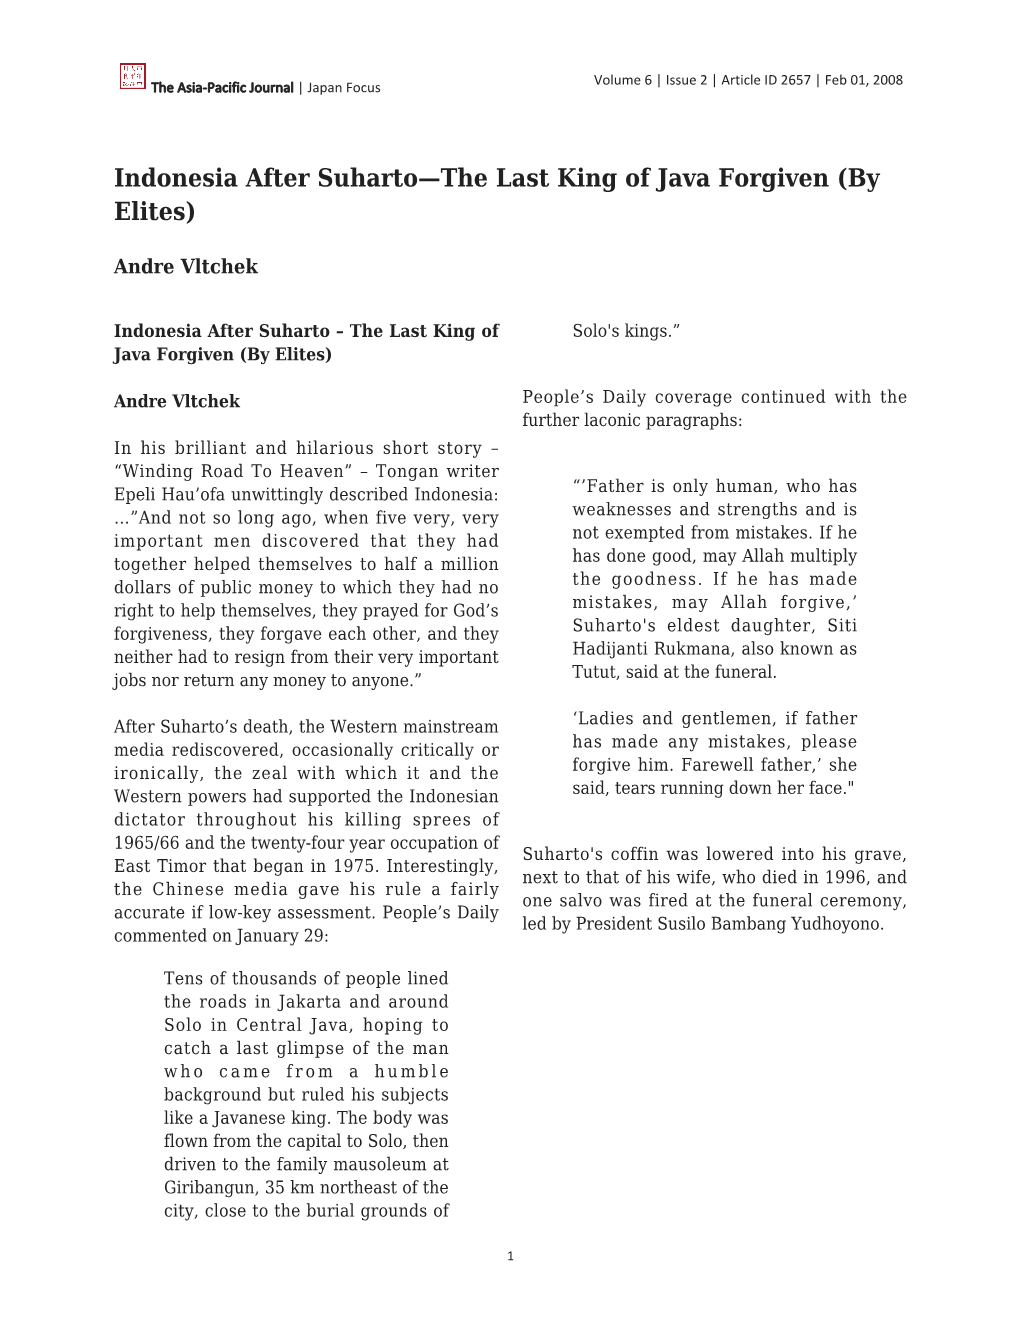 Indonesia After Suharto—The Last King of Java Forgiven (By Elites)